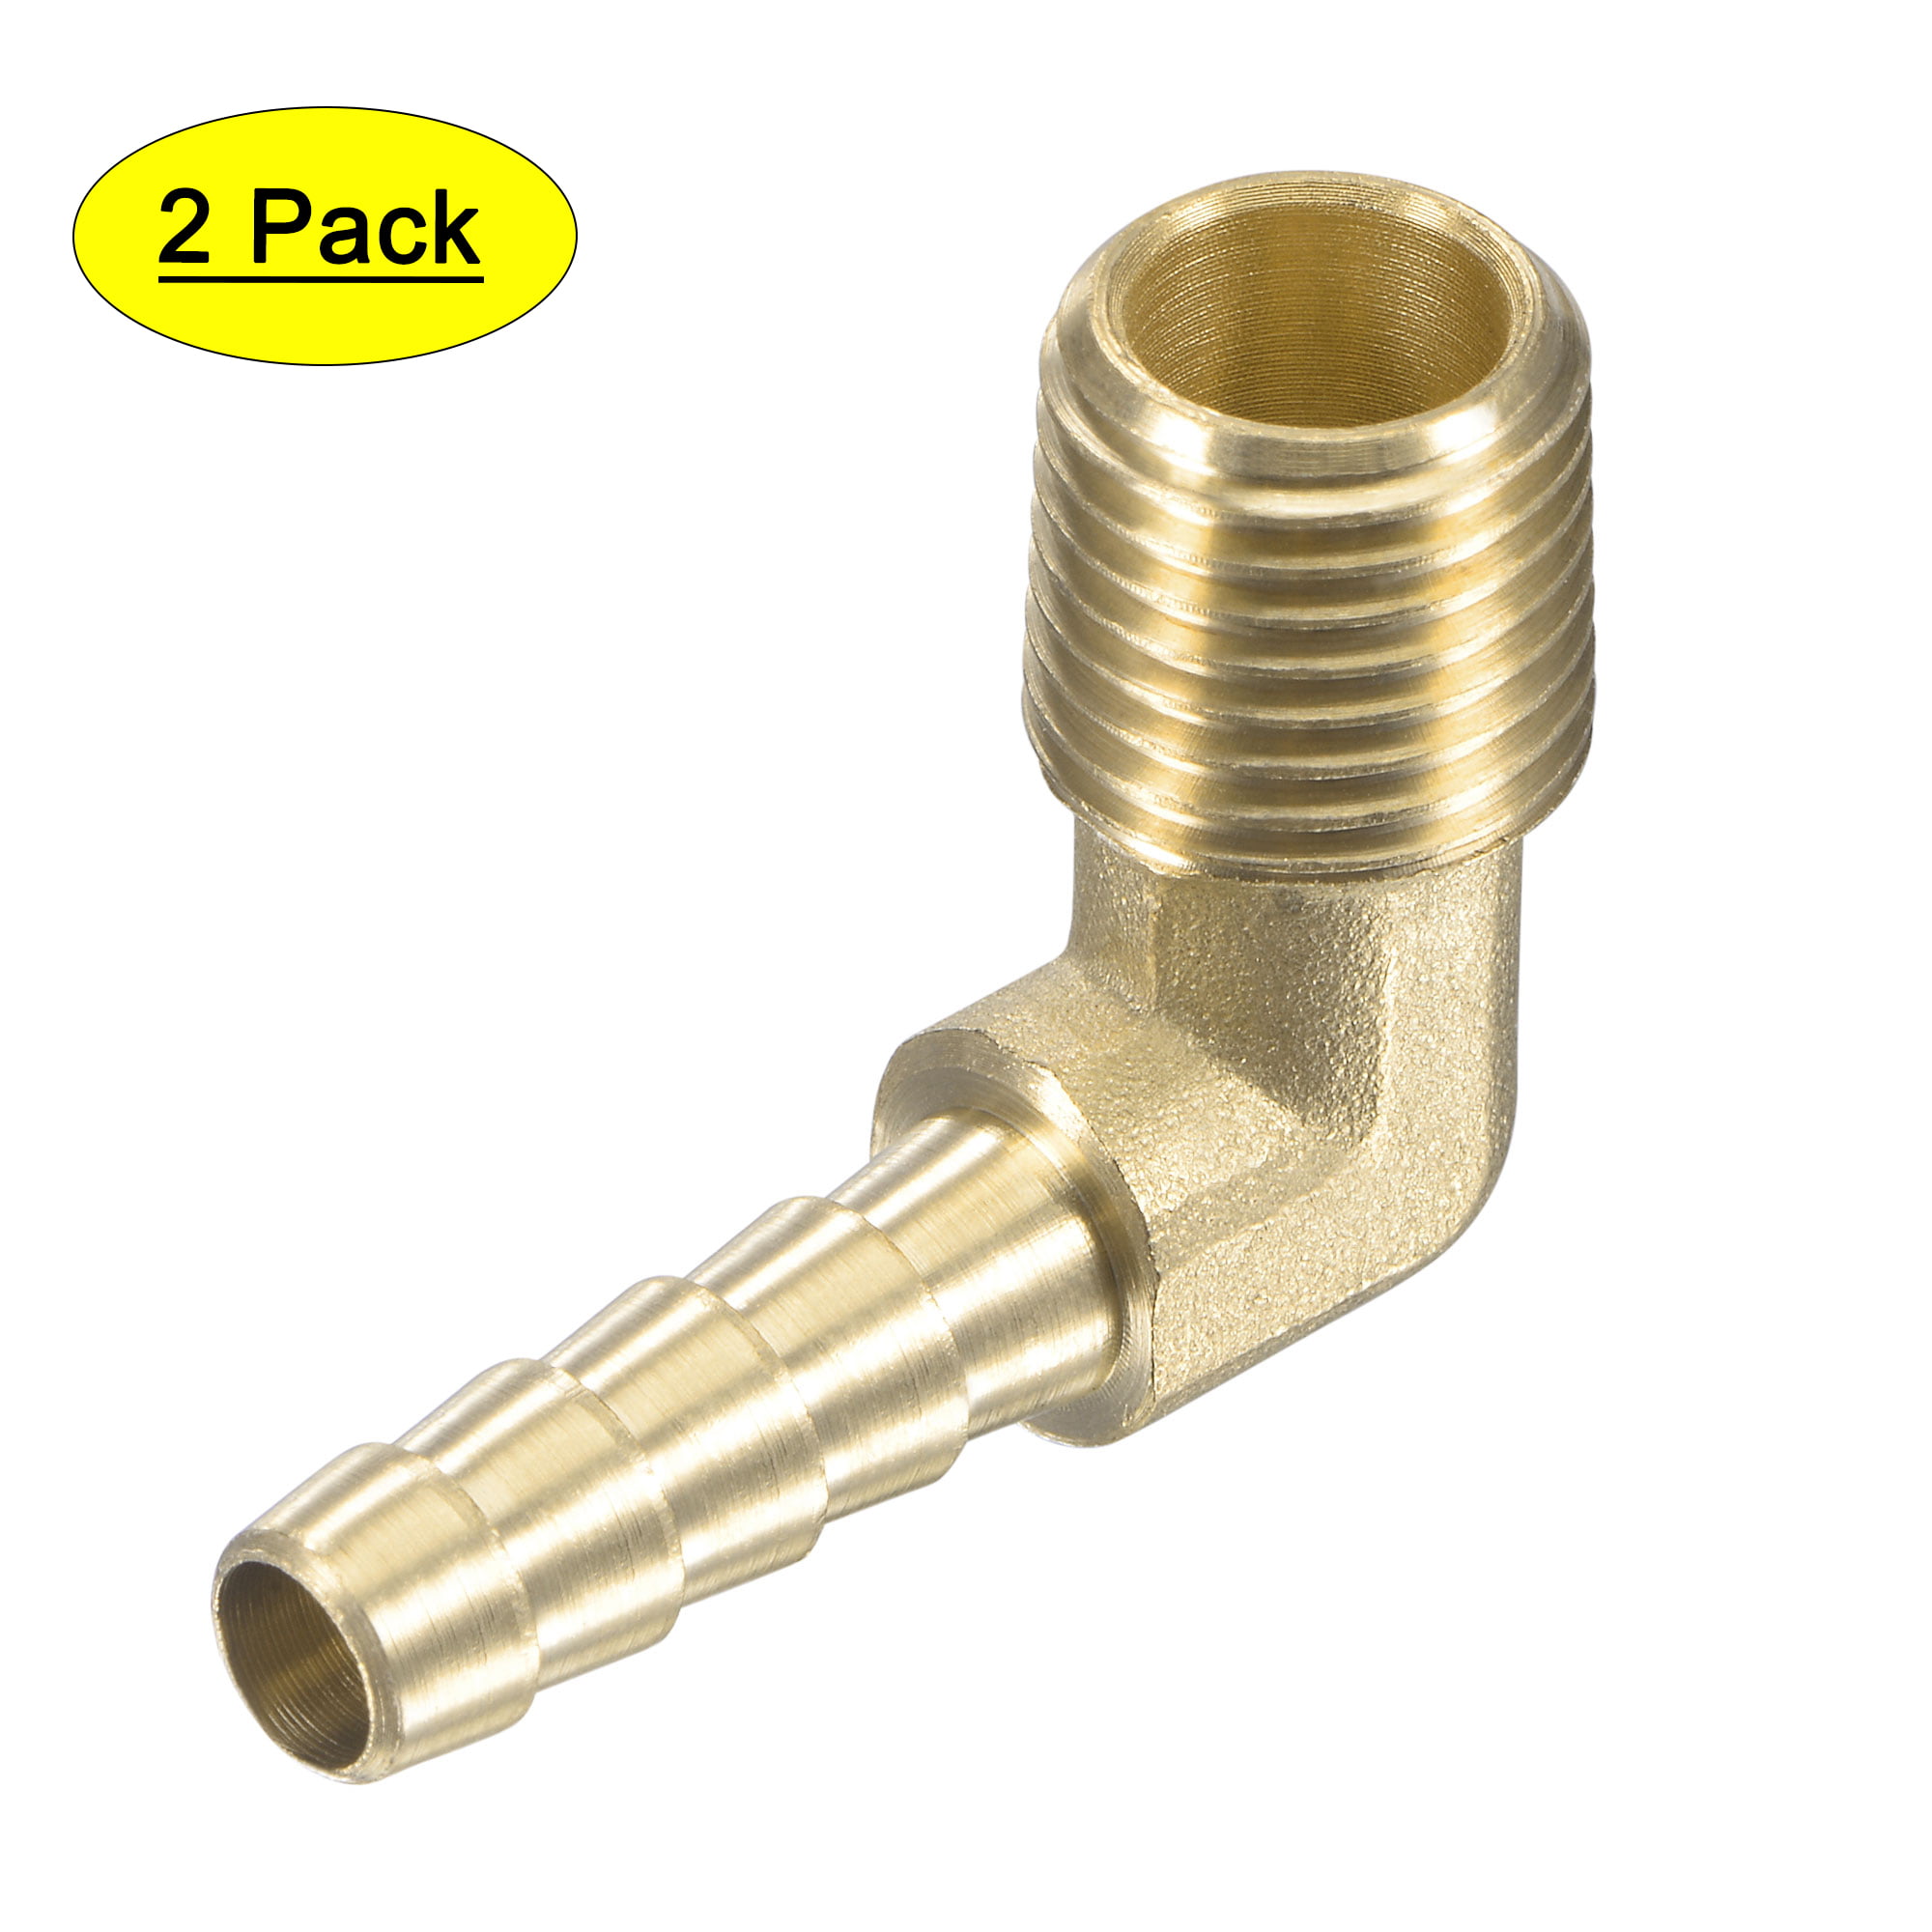 Brass Hose Barb Fitting Elbow 10mm x G1/2 Female Swivel Nut Pipe Connector 